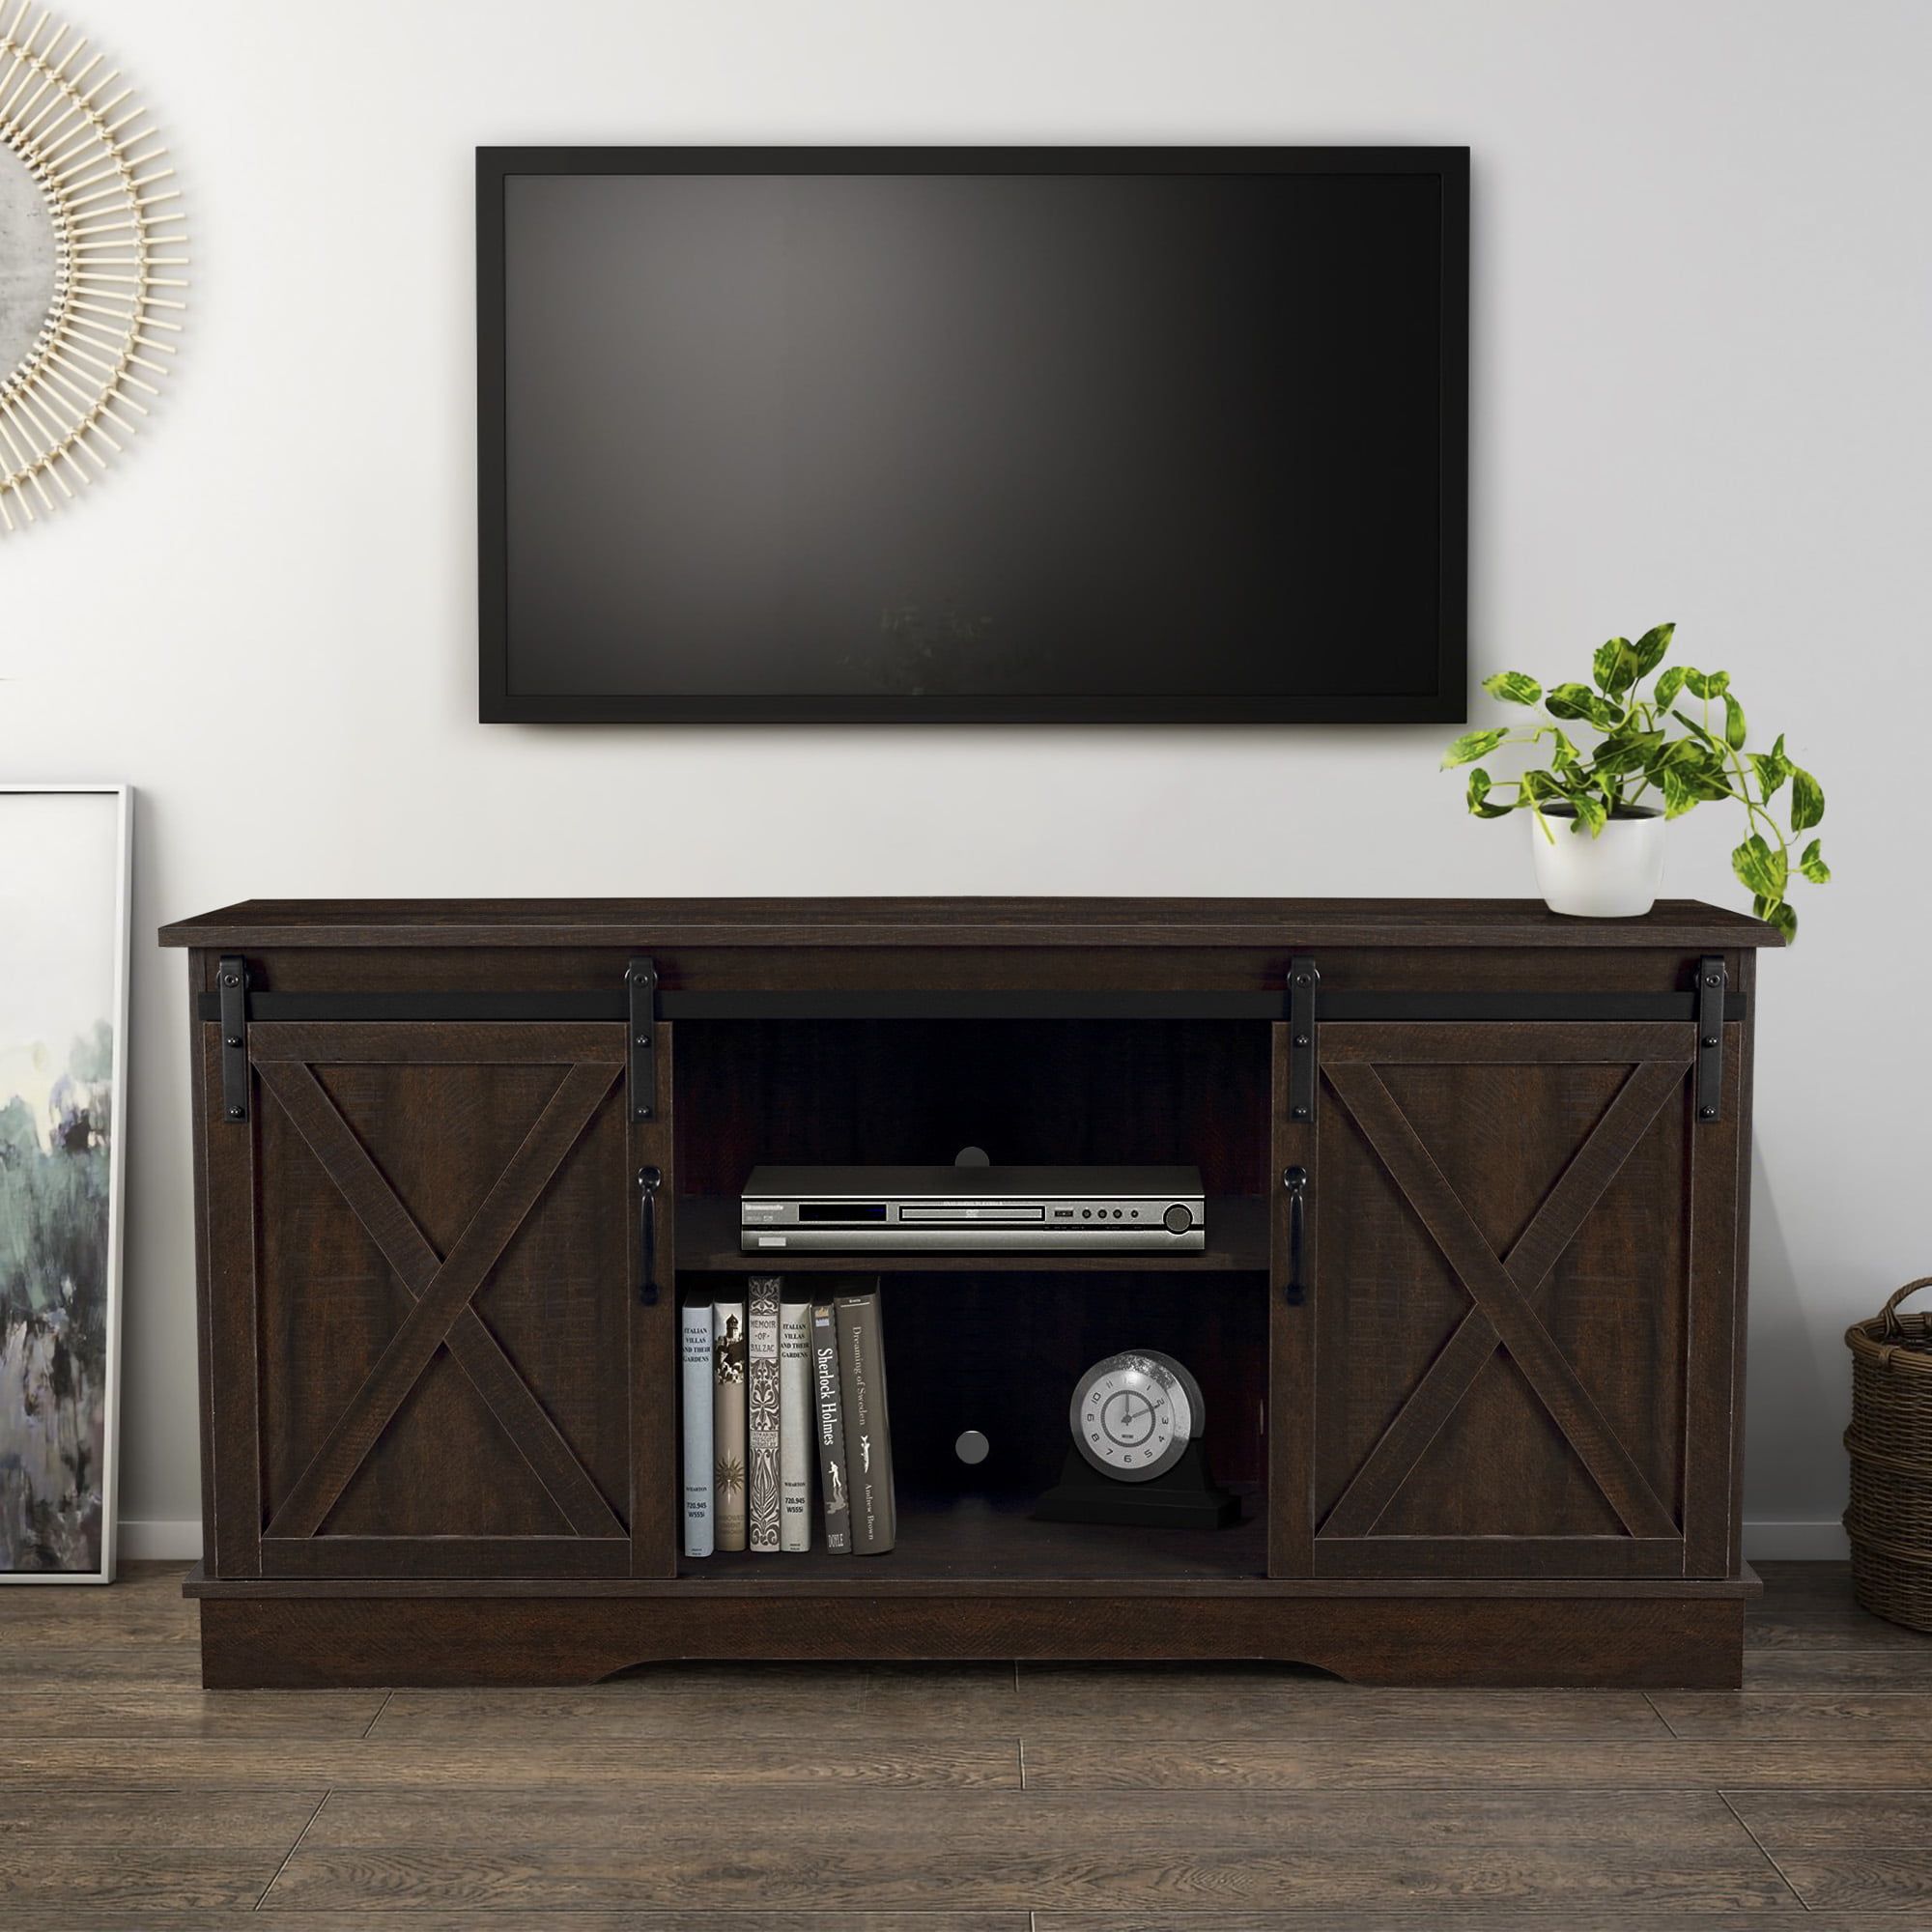 Belleze Modern Farmhouse Style 58 Inch Tv Stand With Sliding Barn Door With Regard To Modern Farmhouse Barn Tv Stands (View 16 of 20)